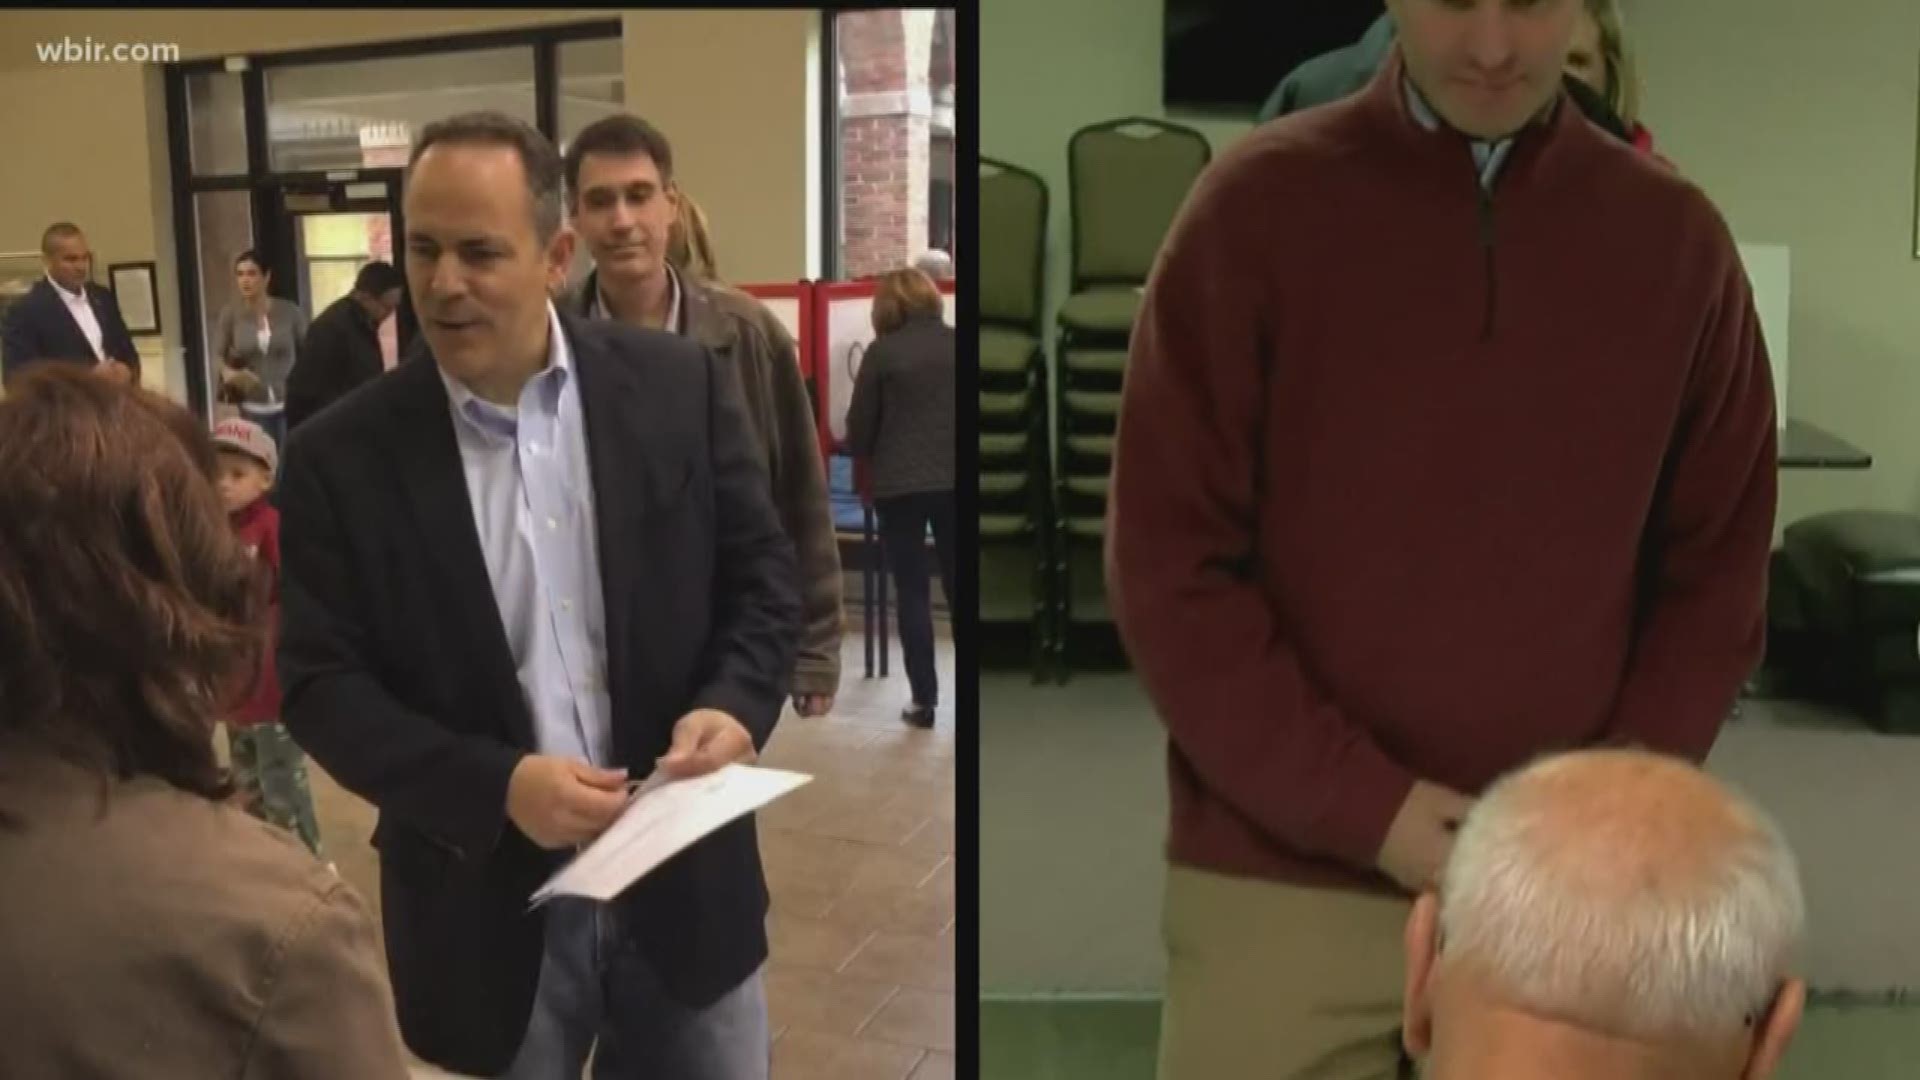 Despite a 5,000 vote difference in votes, Gov. Matt Bevin has refused to concede the election.